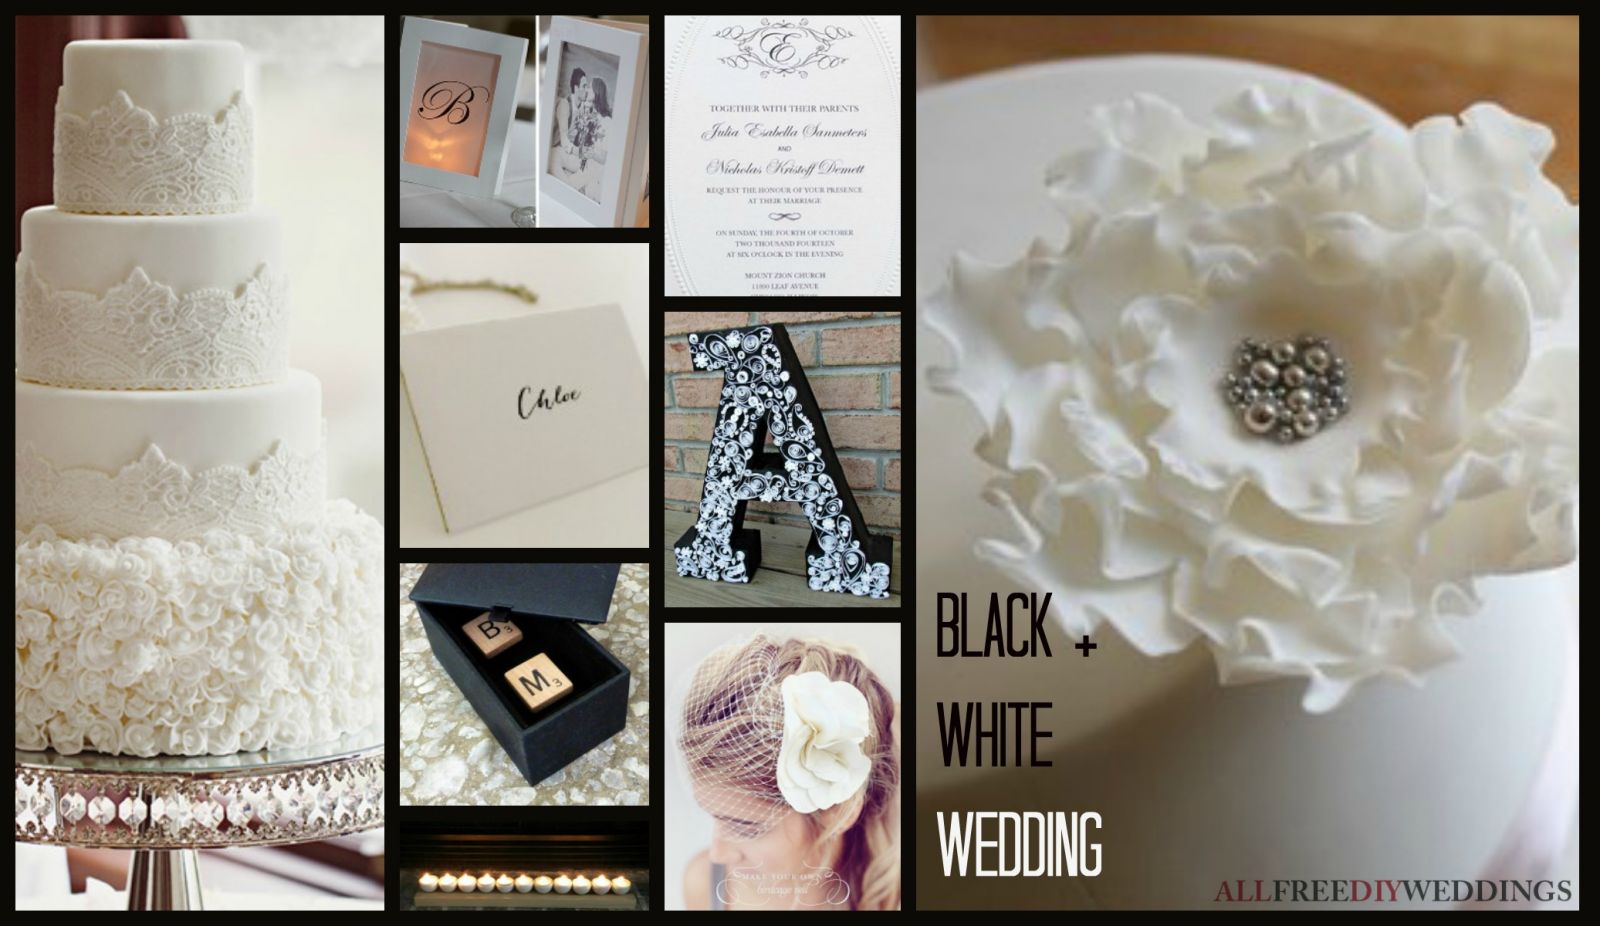 Wedding Color Schemes: Black and White